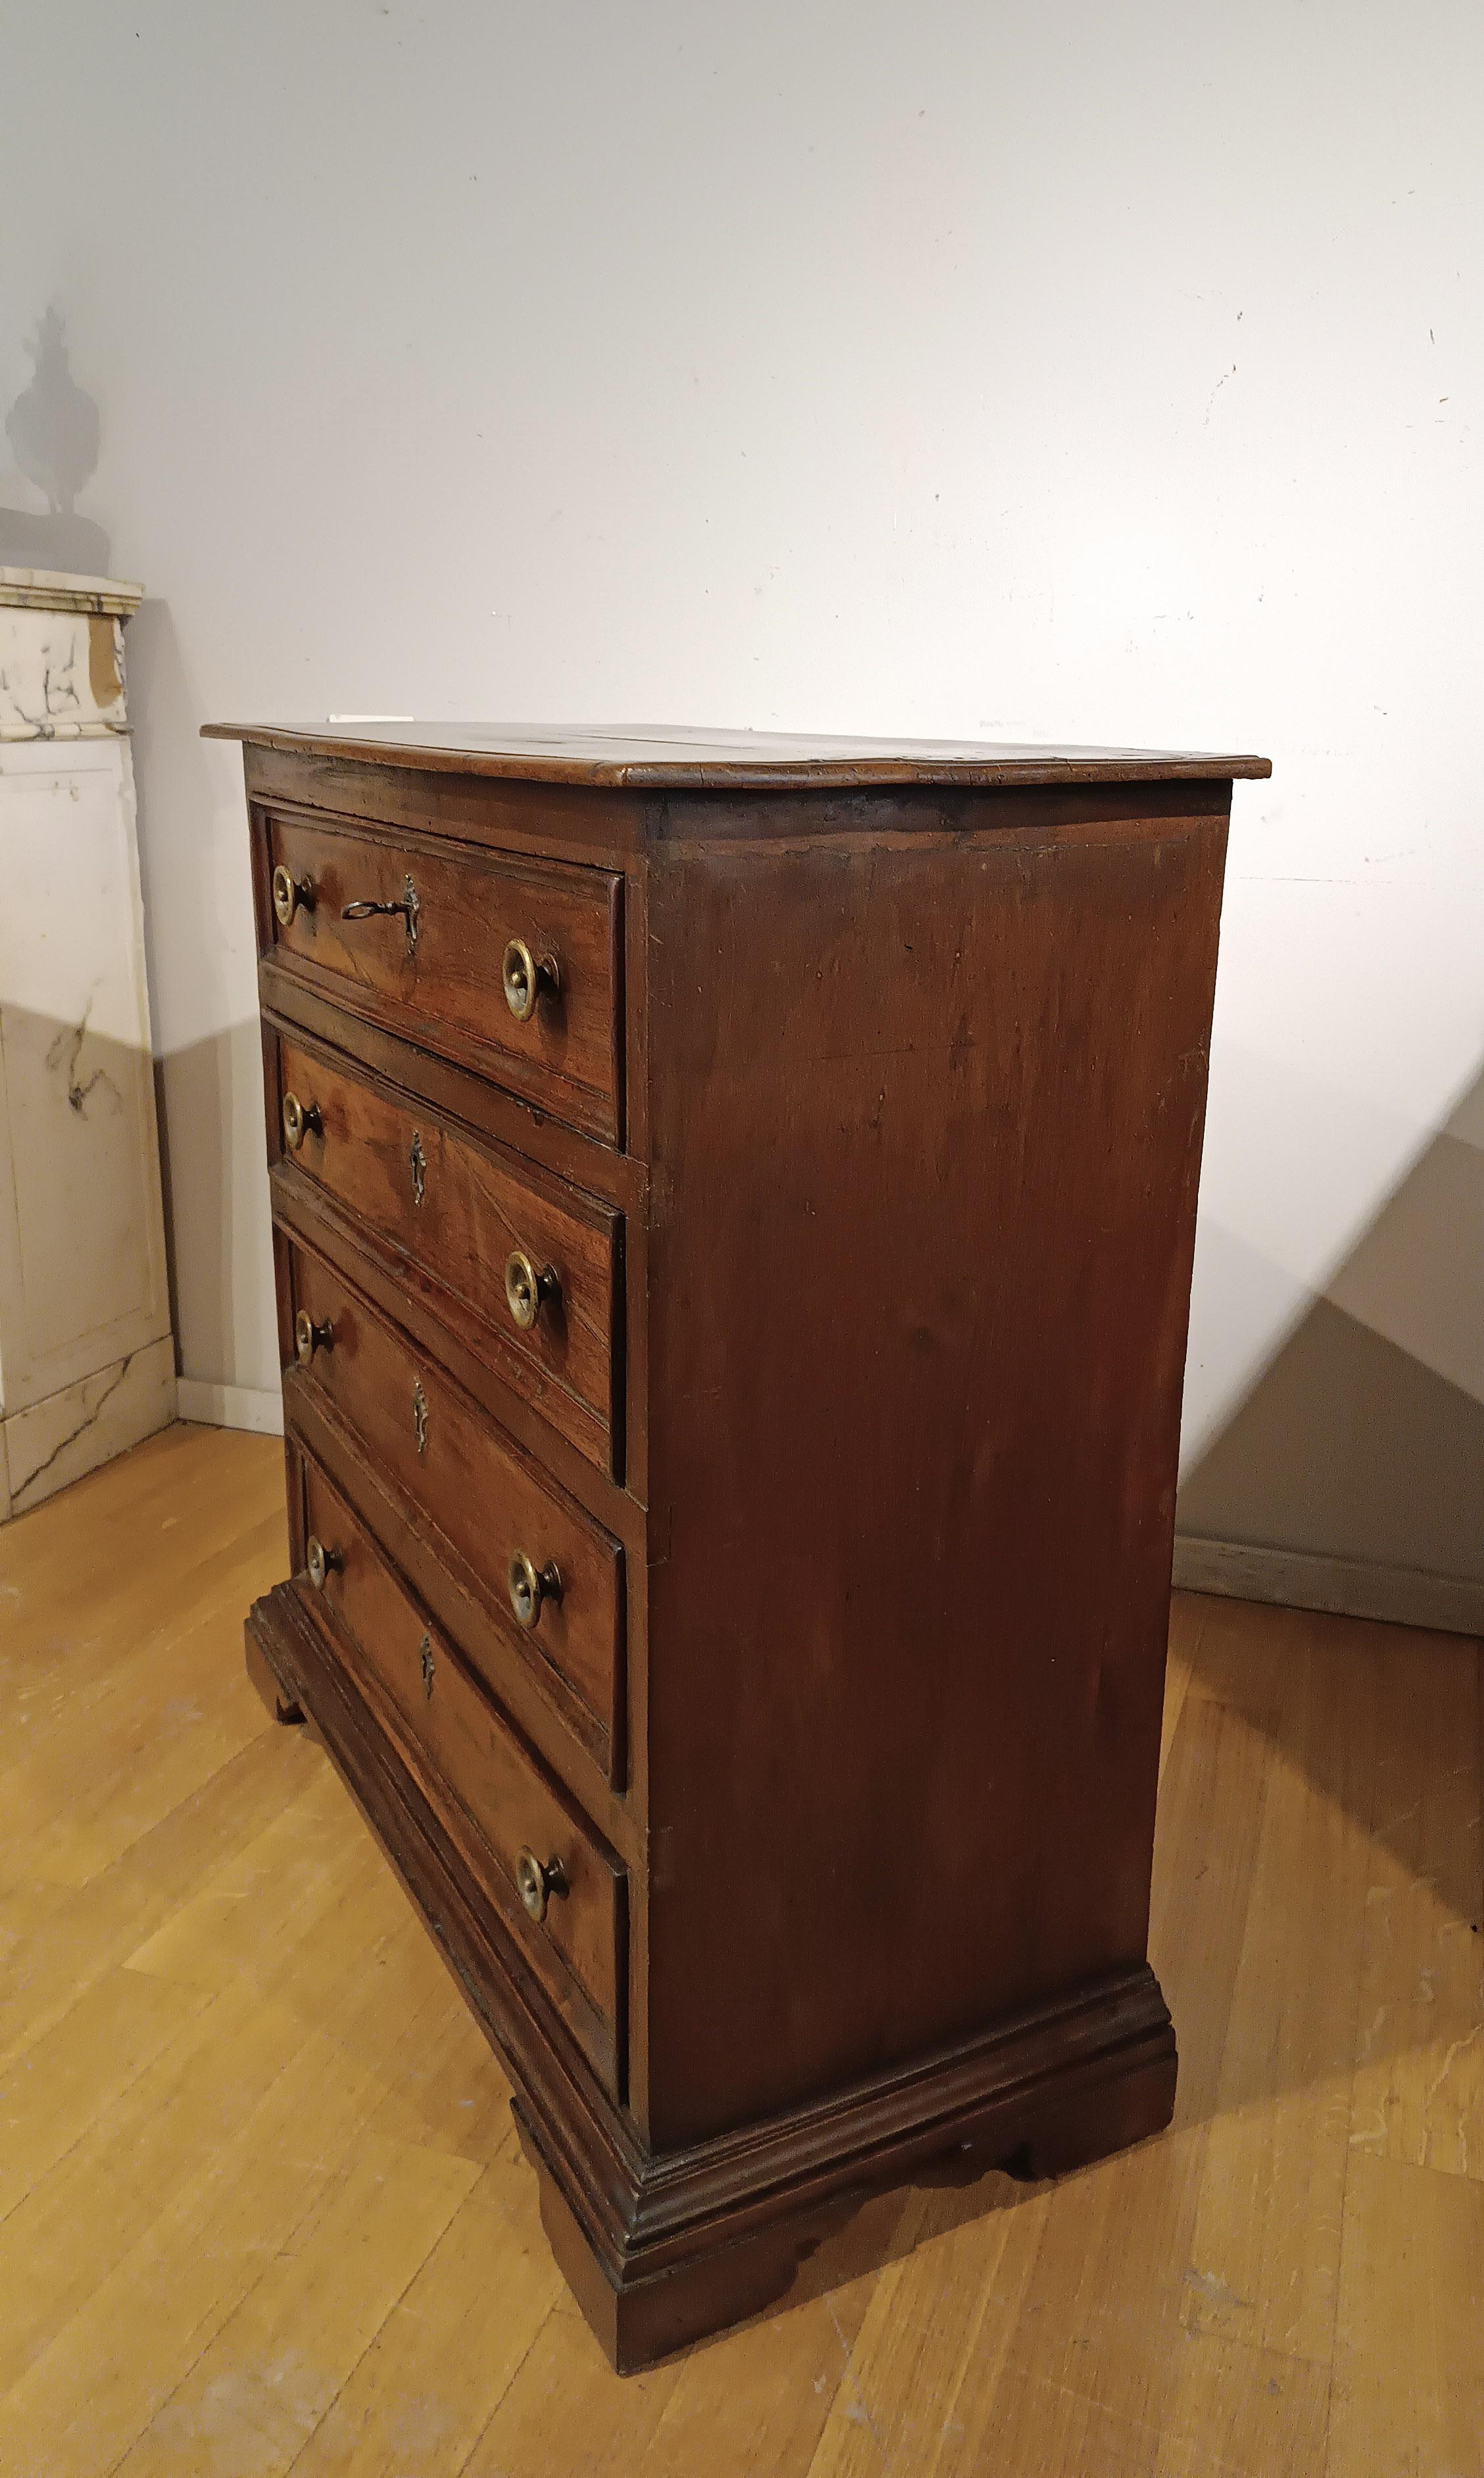 Hand-Carved 17th CENTURY CHEST OF DRAWERS IN SOLID AND VENEREED WALNUT For Sale